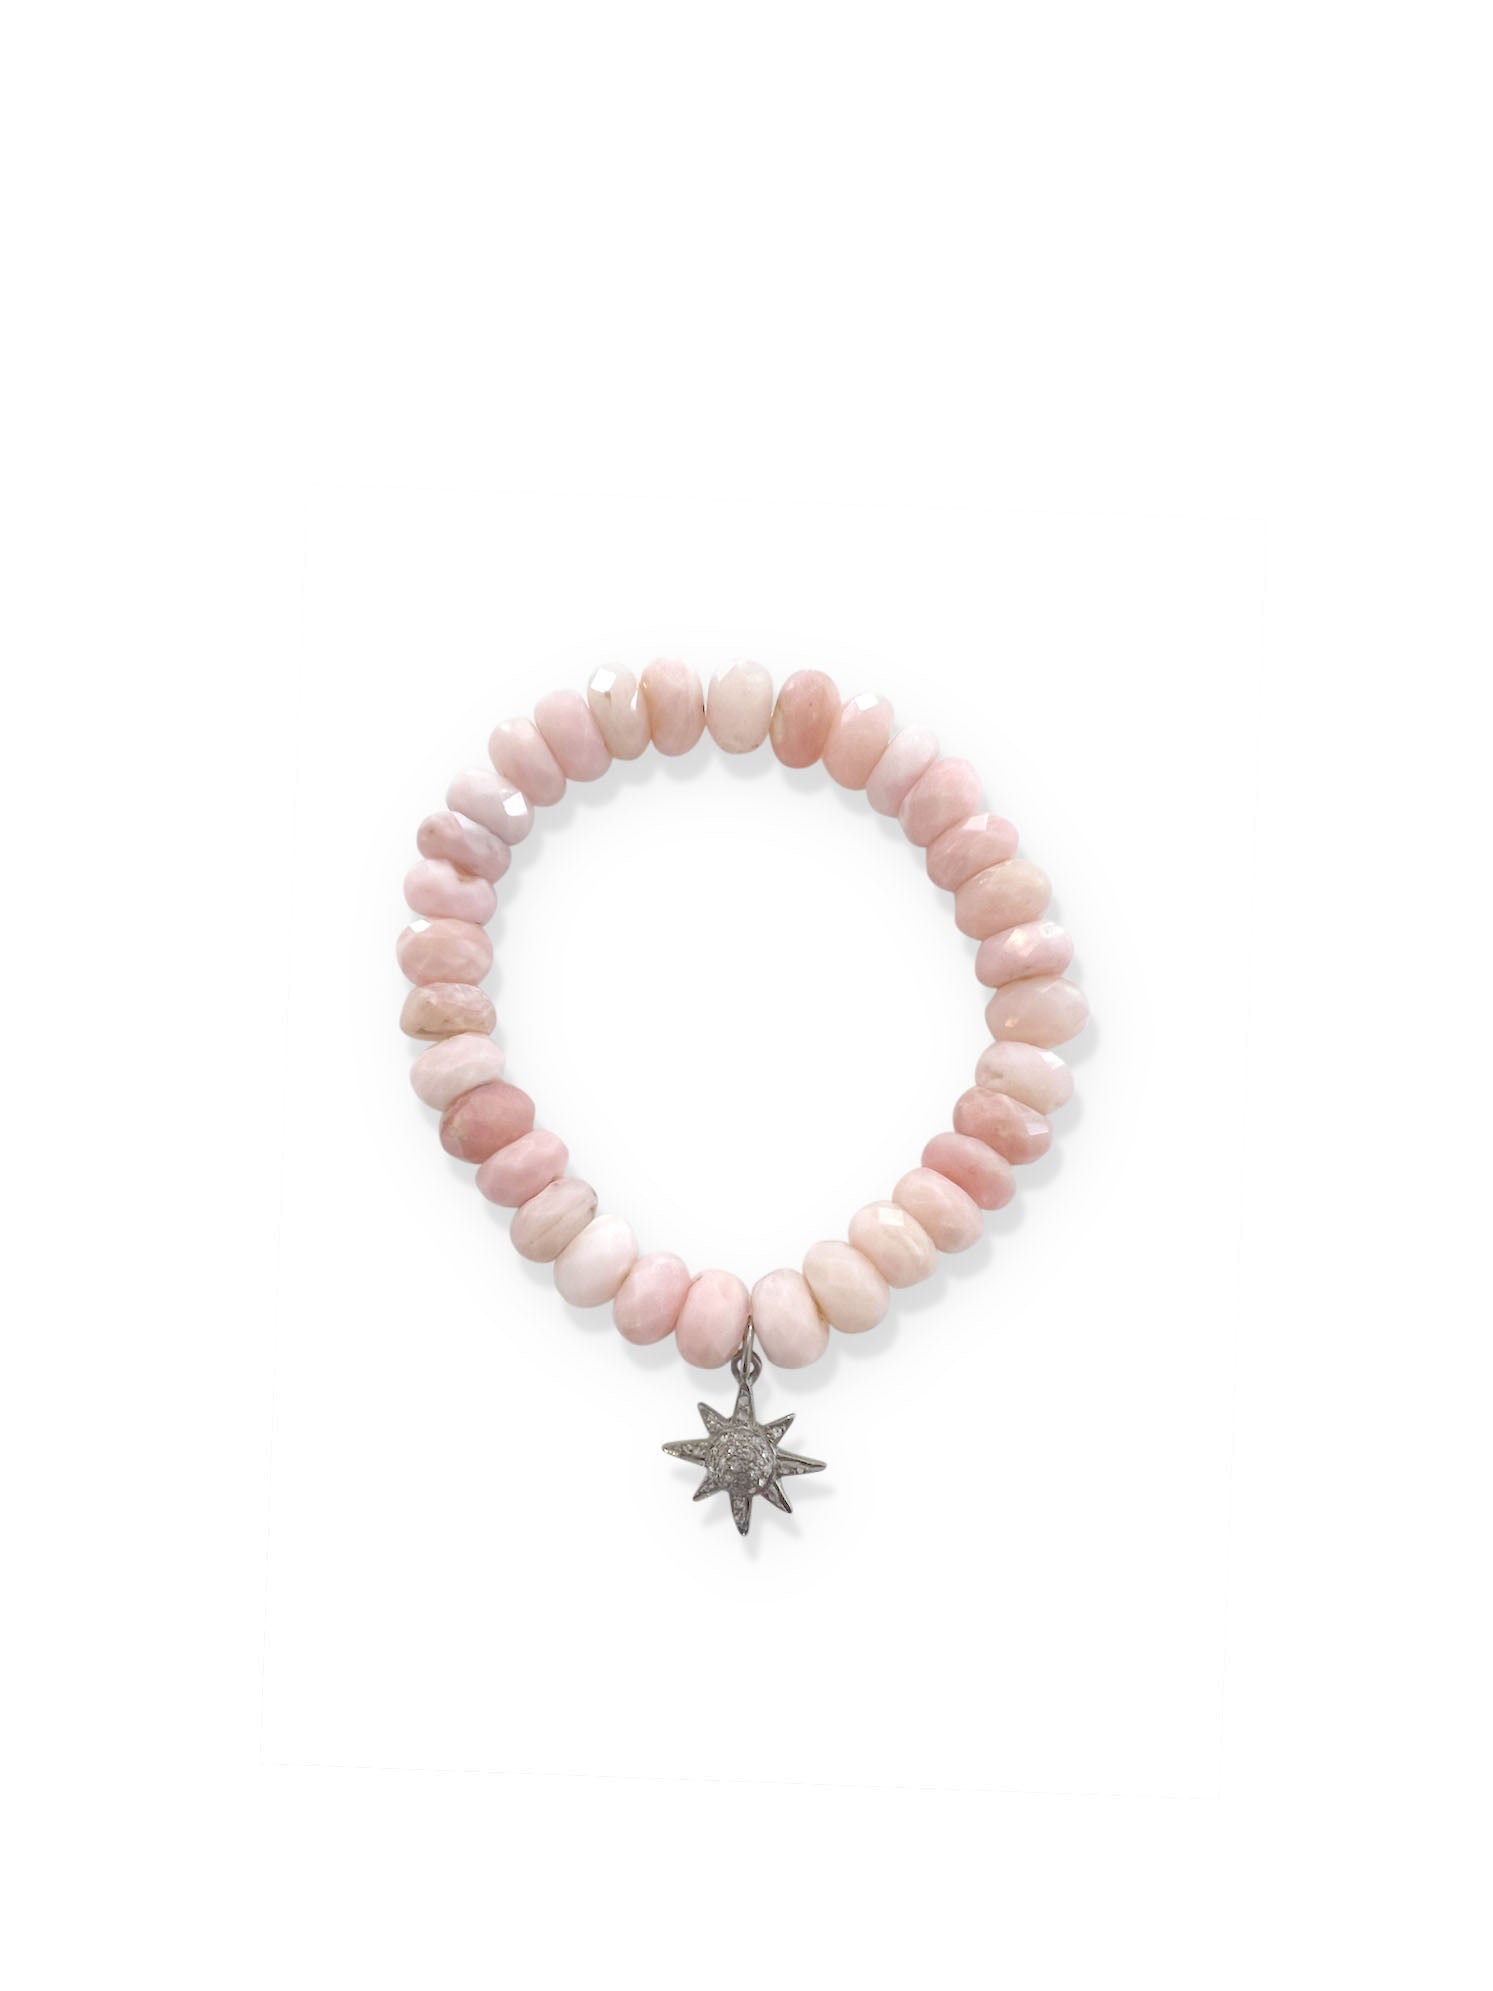 Pink Opal Rondelles with Pave Diamond Starburst in Sterling Silver